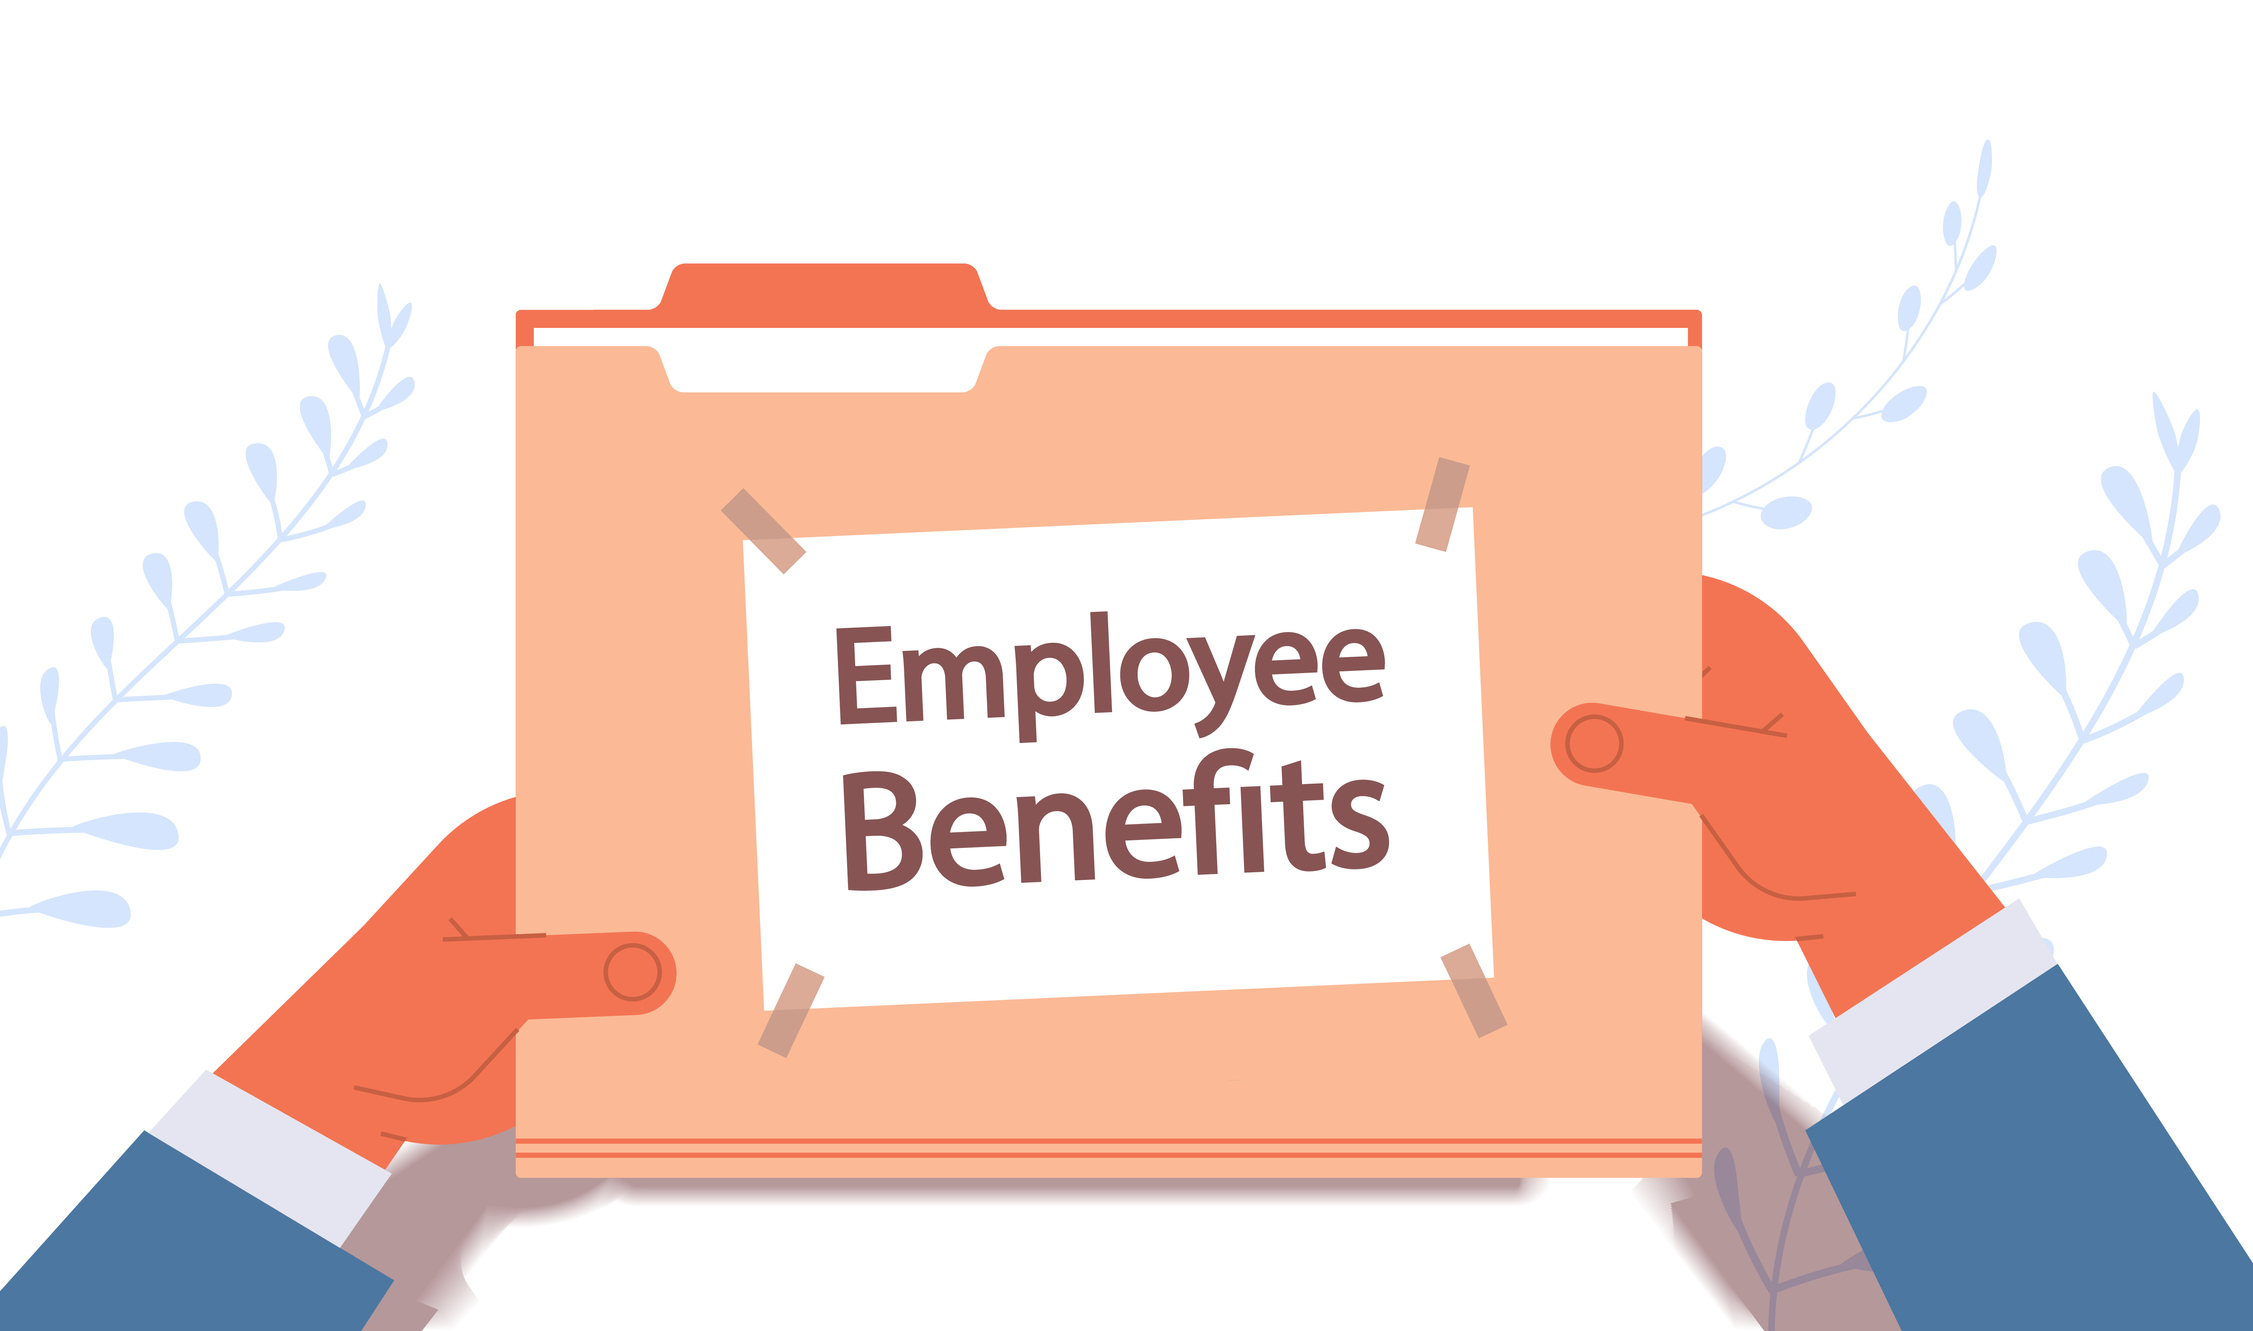 Offer Competitive Benefits with BerniePortal’s Benefits Administration